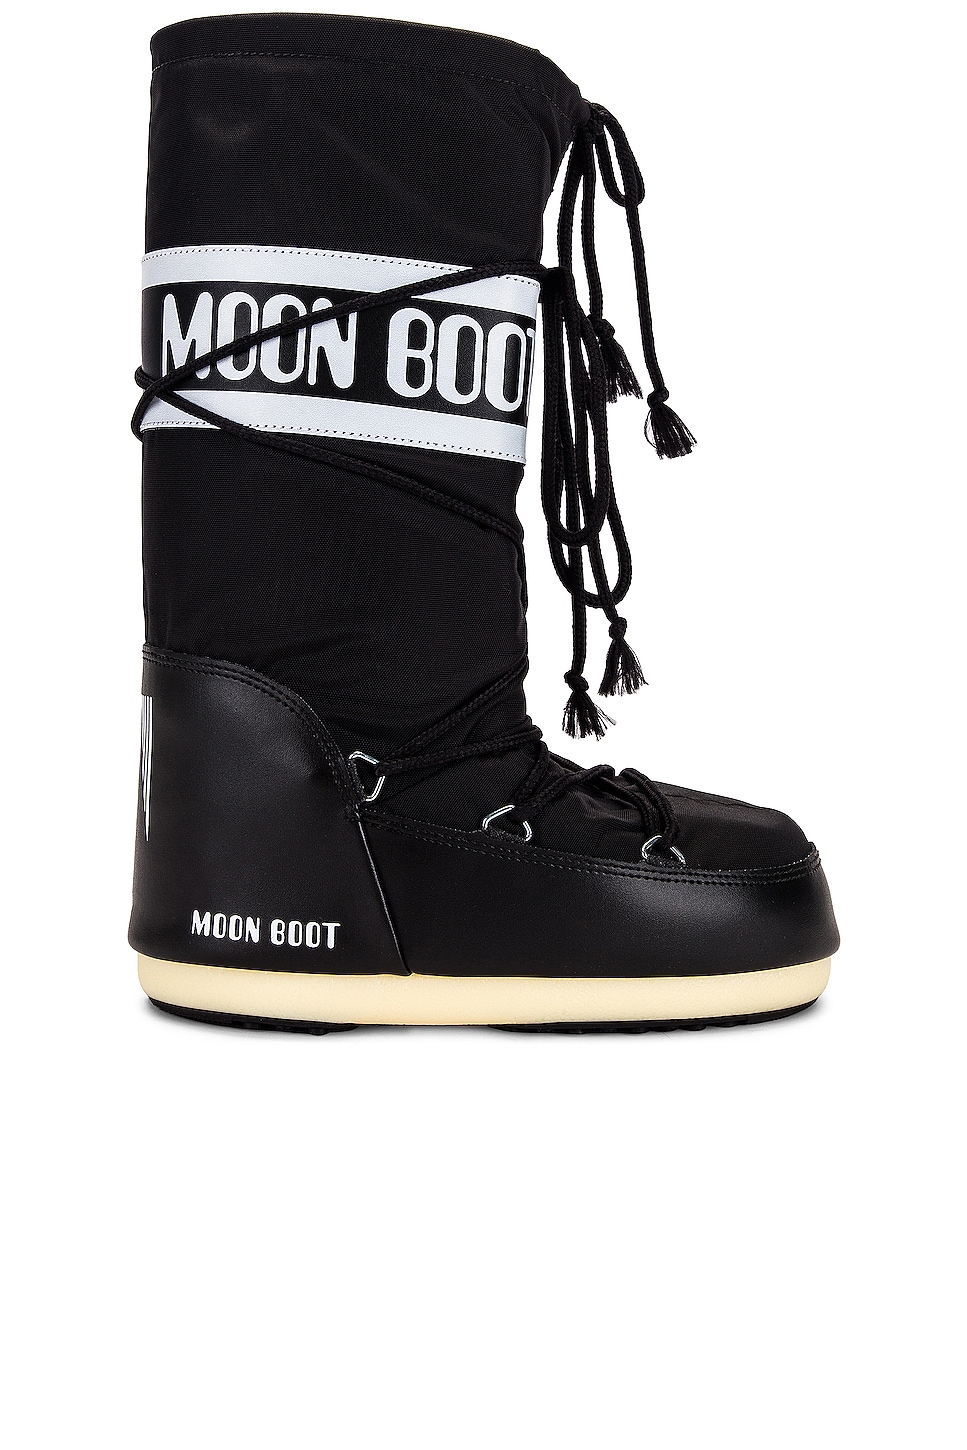 Image 1 of MOON BOOT Nylon Classic Boot in Black